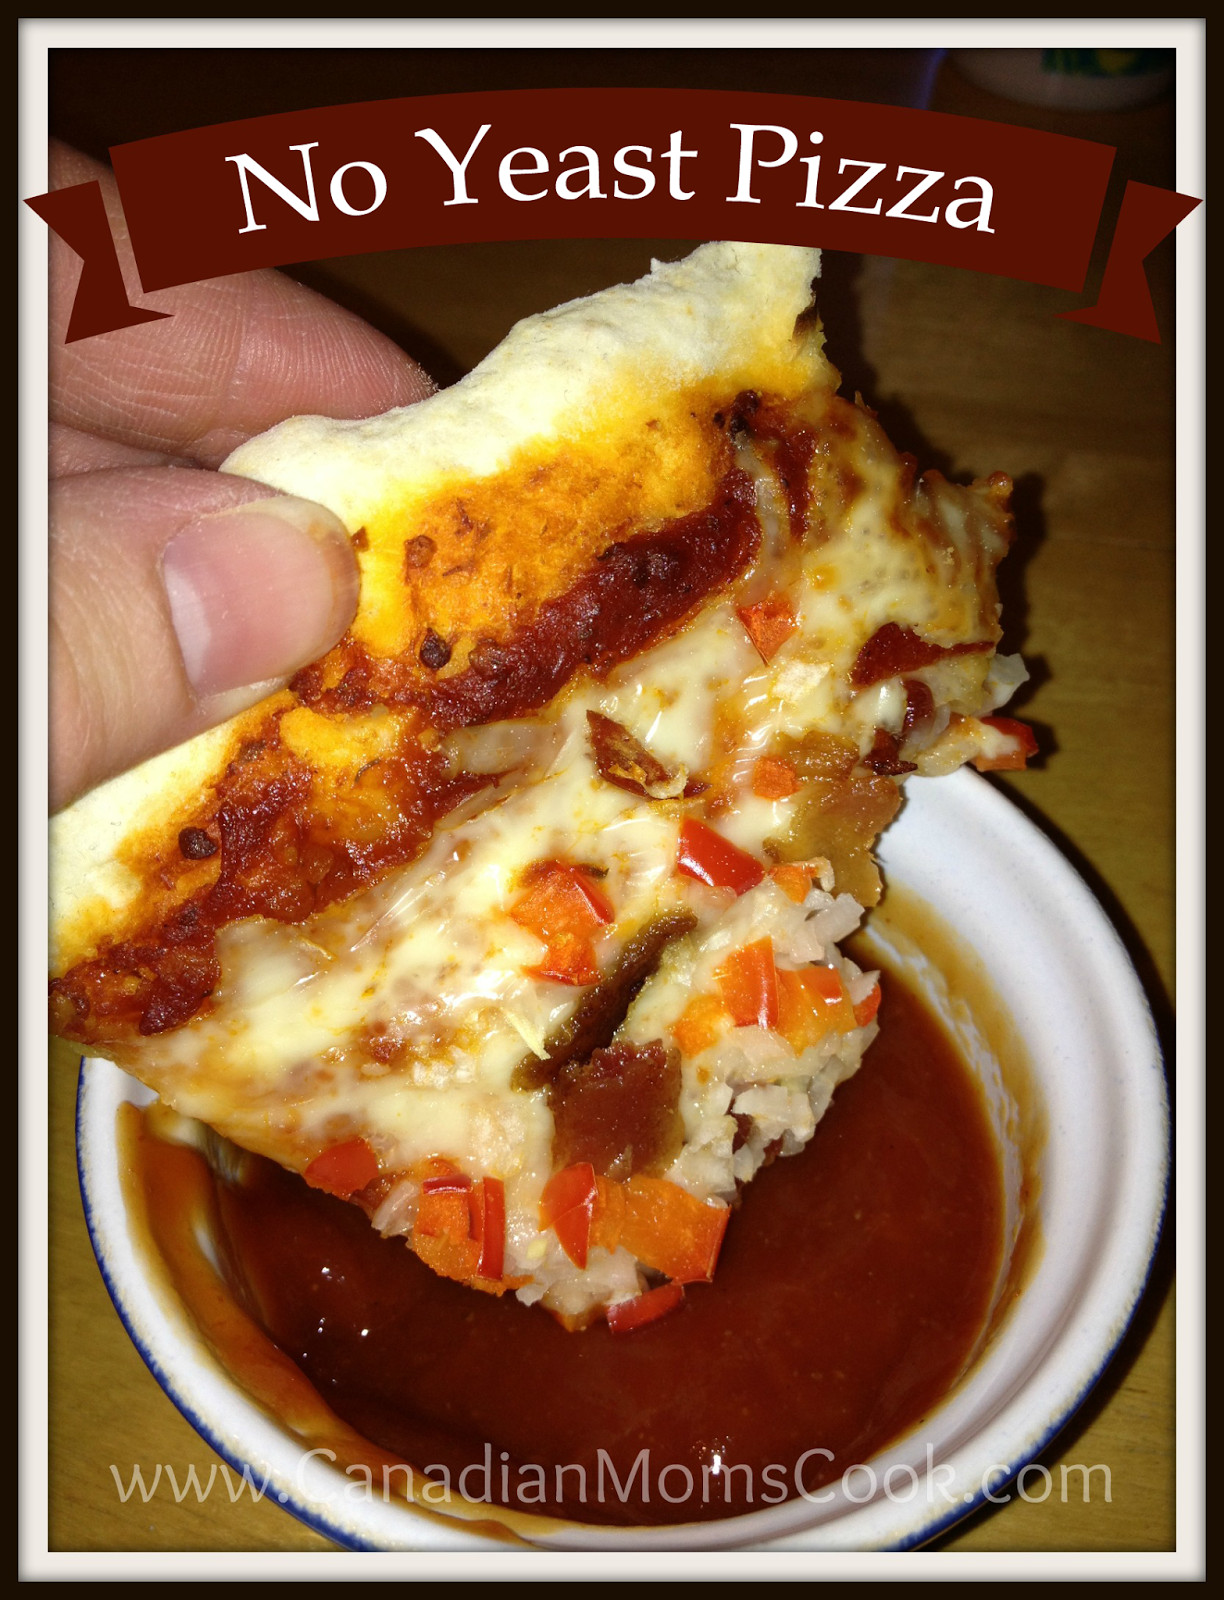 Easy Pizza Dough Recipe No Yeast
 Canadian Moms Cook